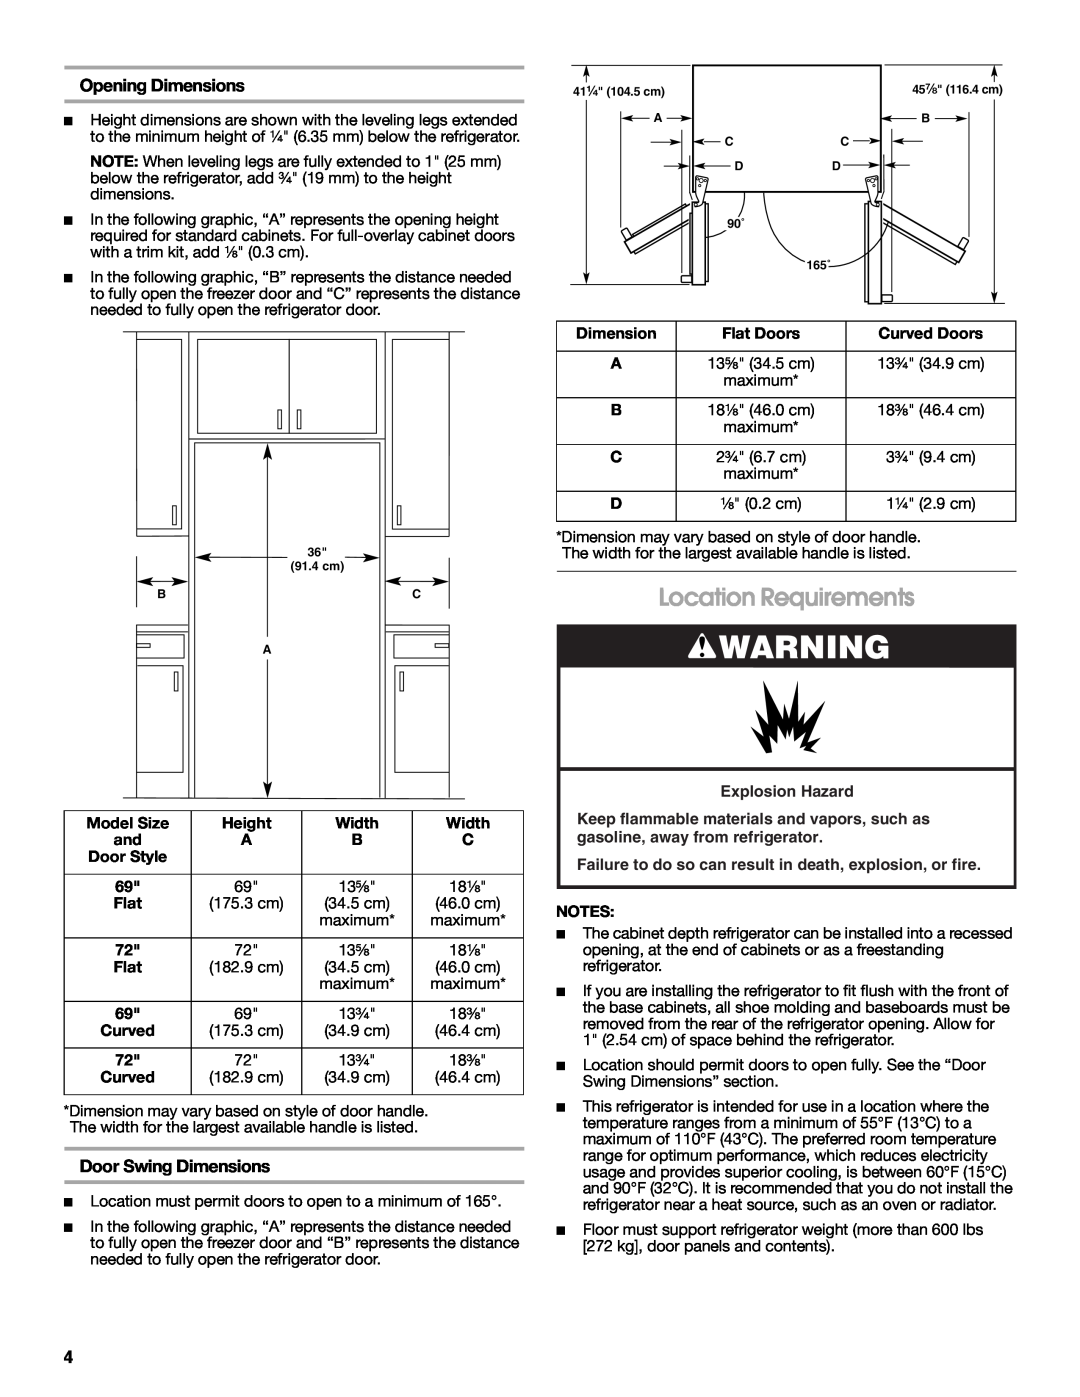 Whirlpool W10168334B installation instructions Location Requirements, Opening Dimensions, Door Swing Dimensions 